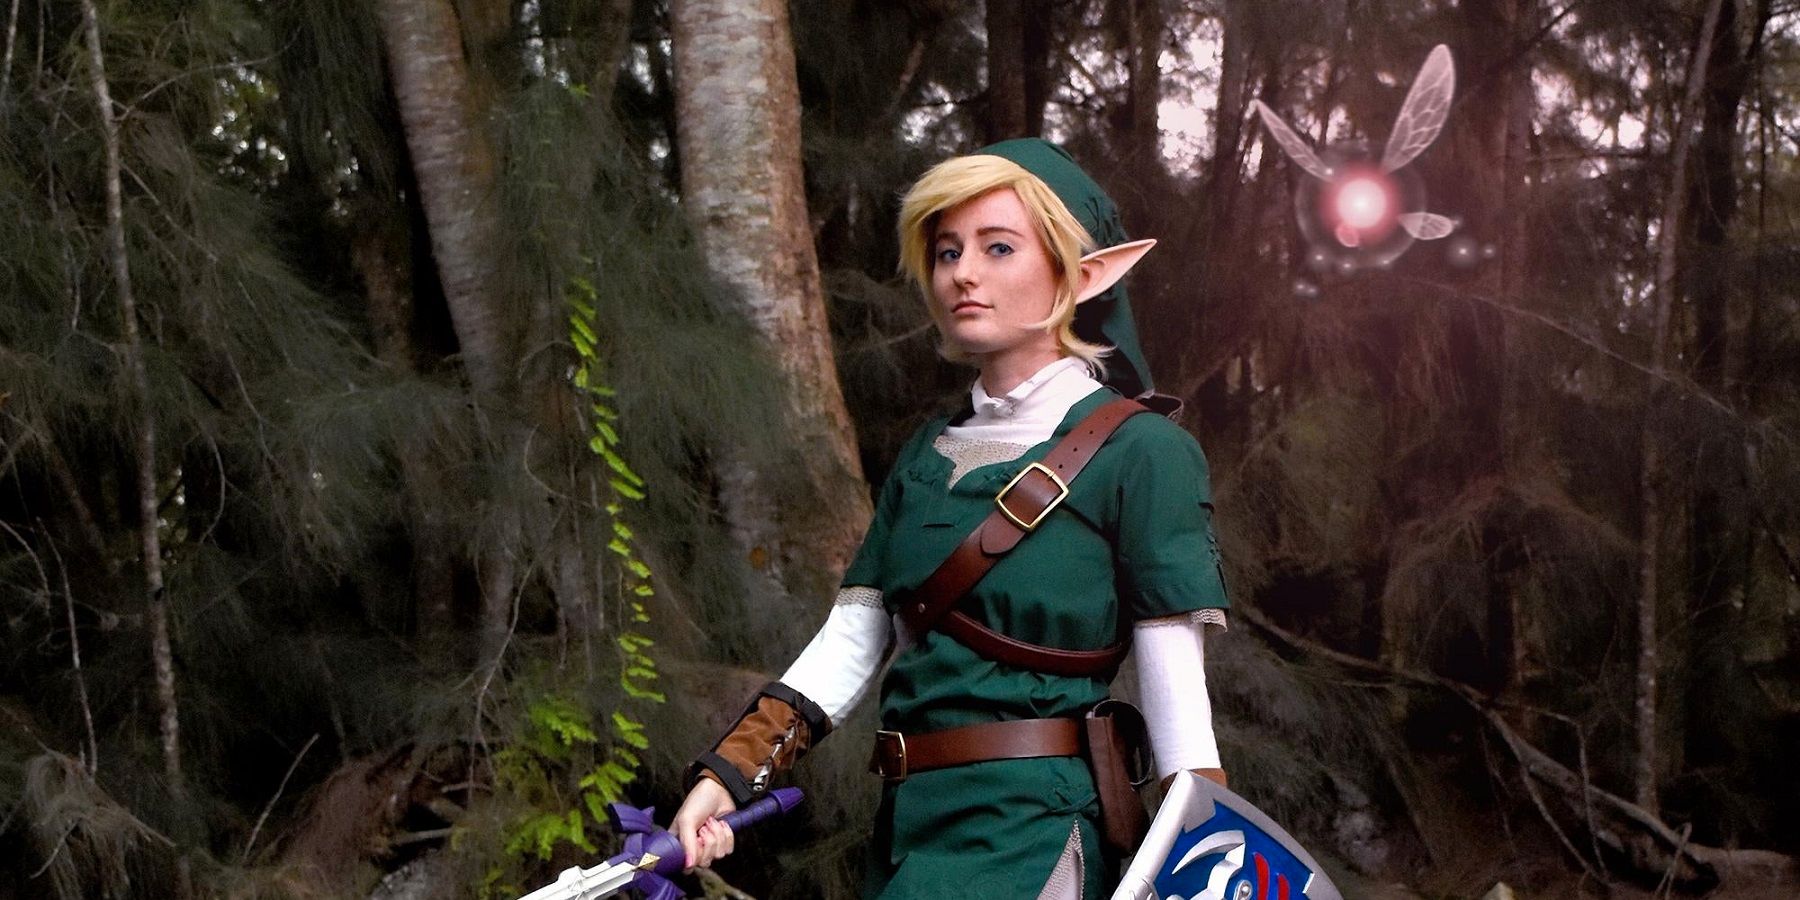 Inarguably The Best Link And Princess Zelda Cosplay